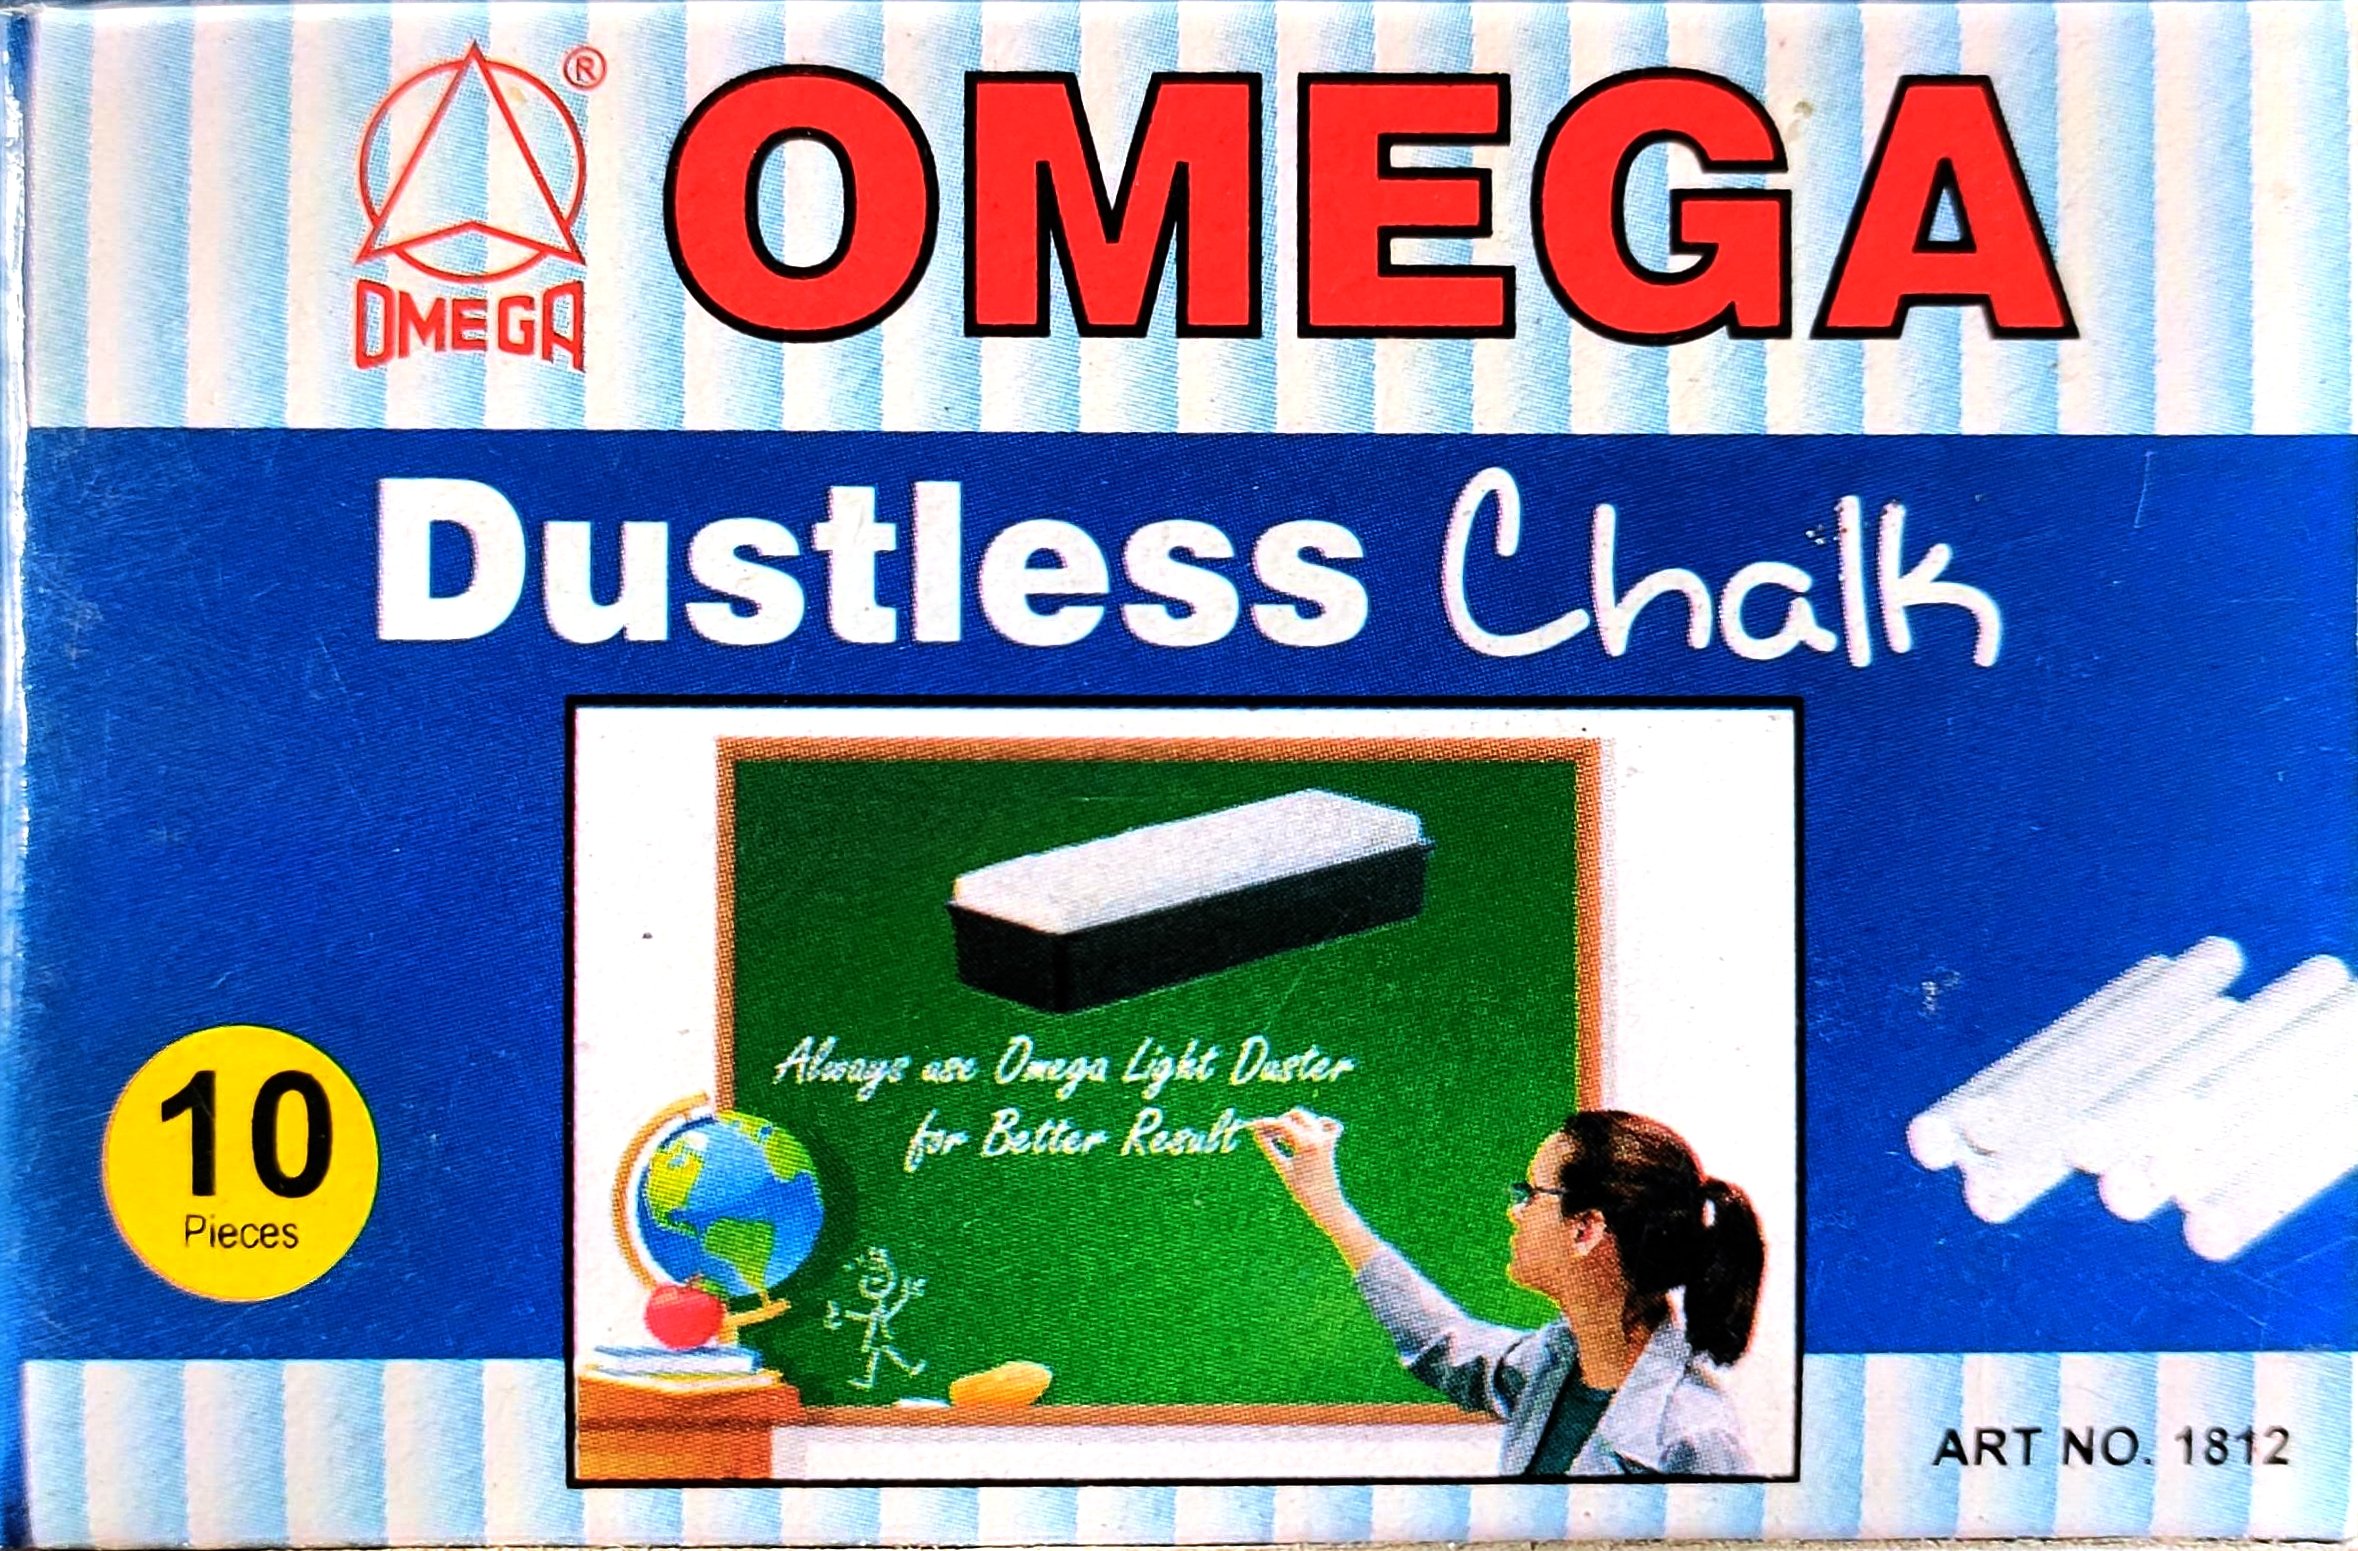 StationerySoko - Omega dustless chalk now available in